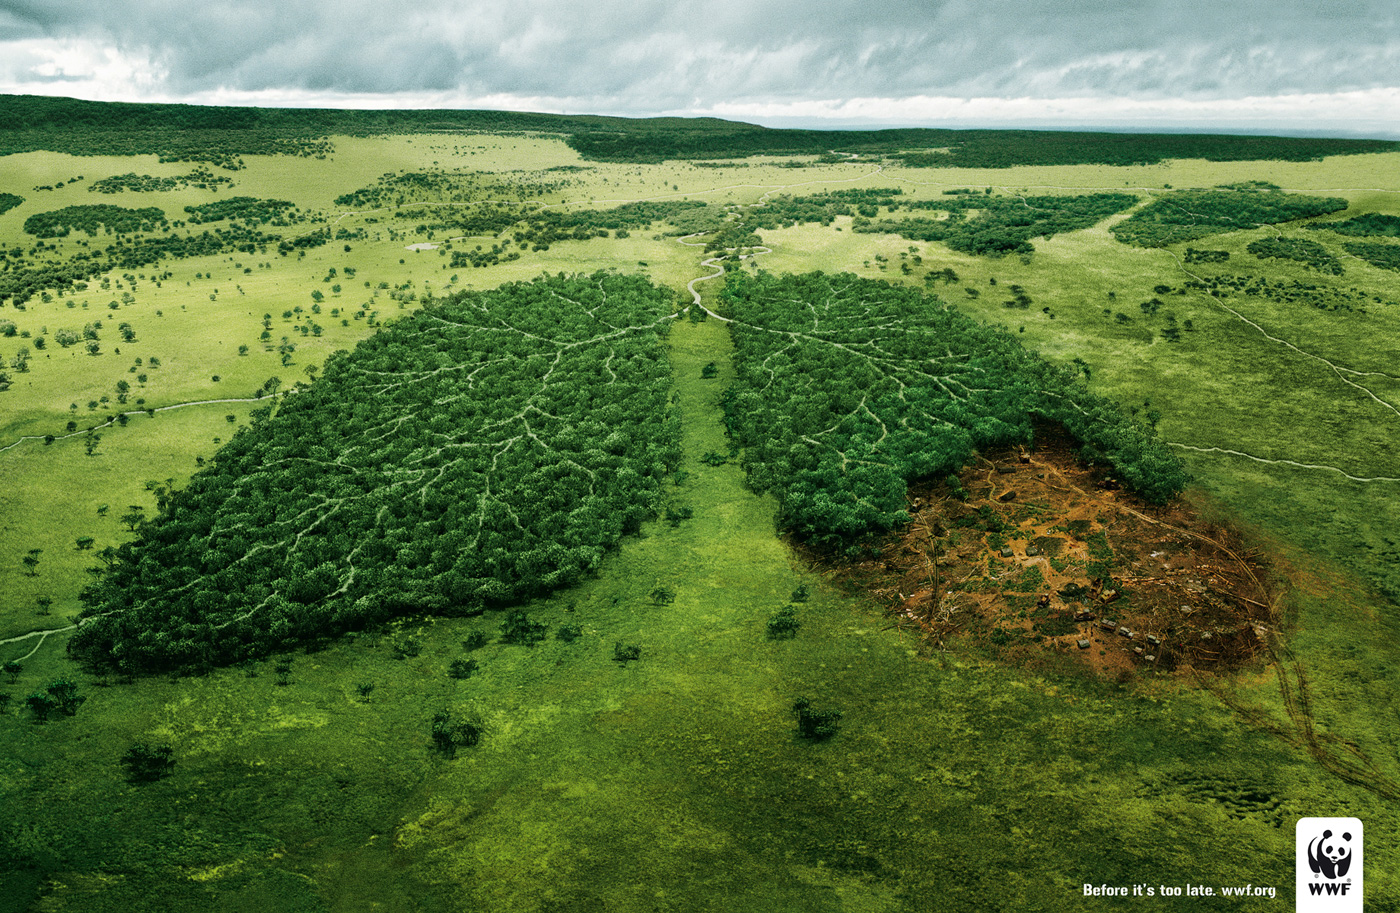 Topic sans paroles... - Page 17 Deforestation+and+lungs